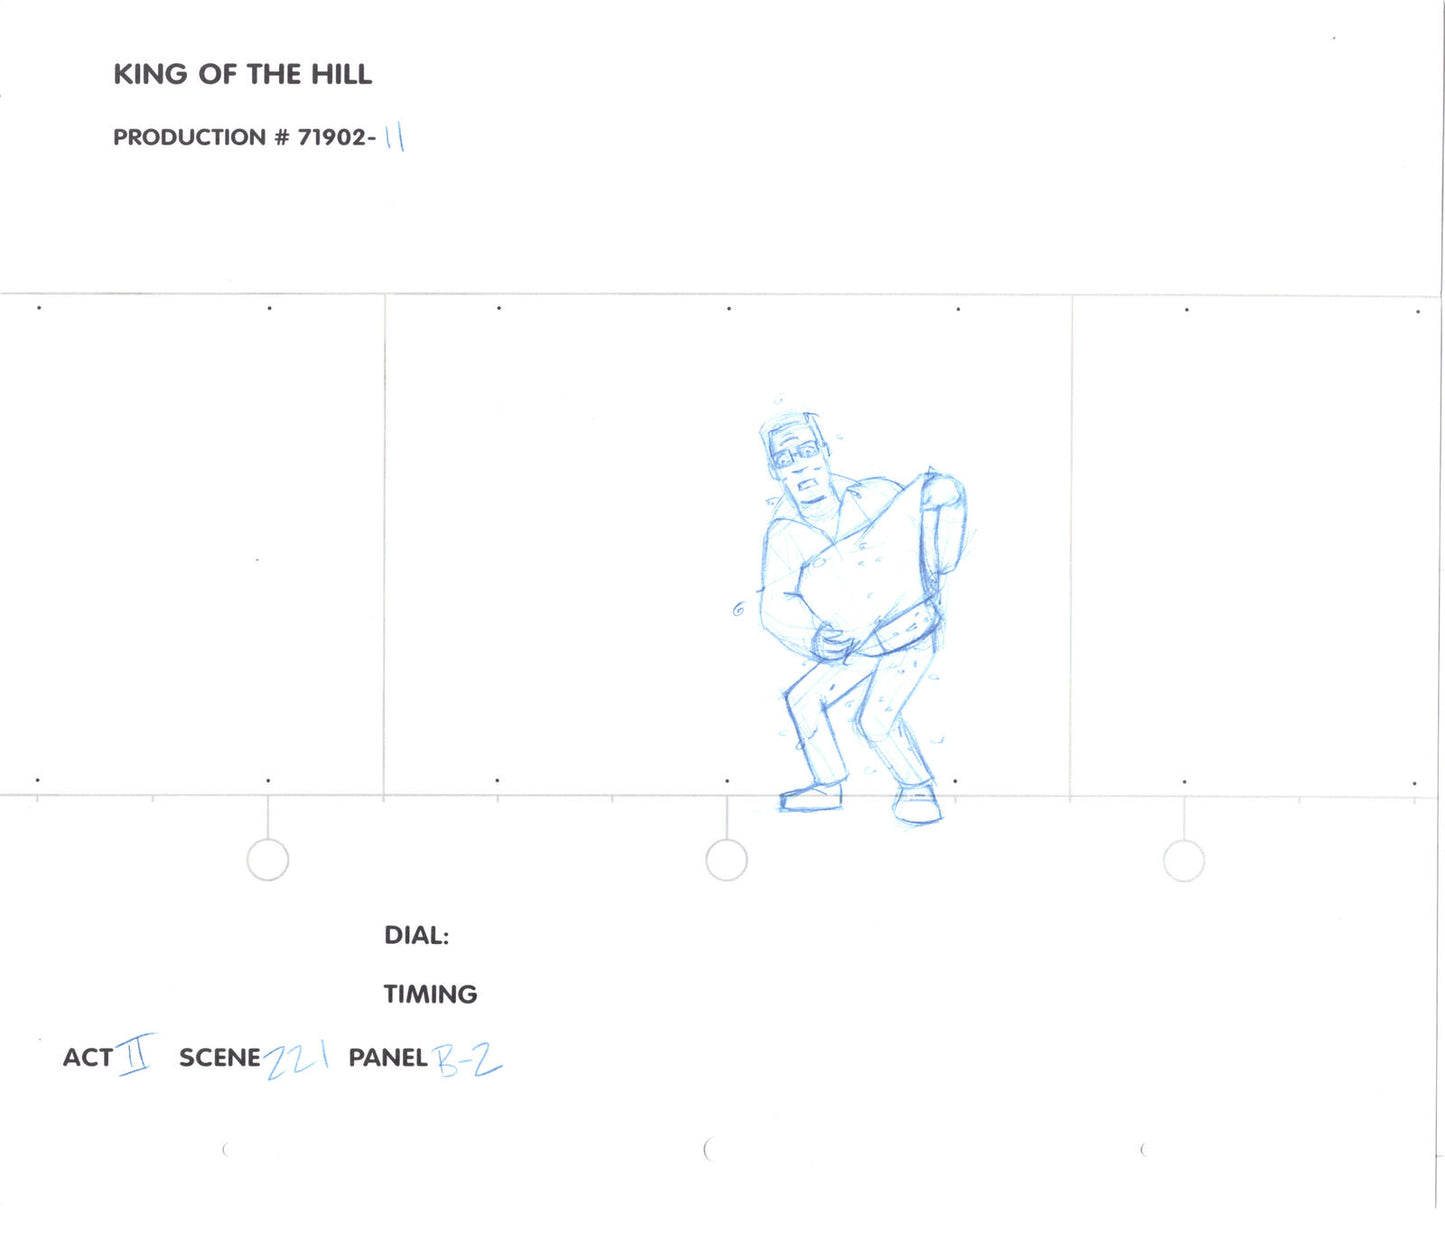 Lot of 4 King of the Hill Original Animation Production Cel Drawings from FOX - See below - ONLY for Matthew M - we will not honor this purchase for anyone else 2